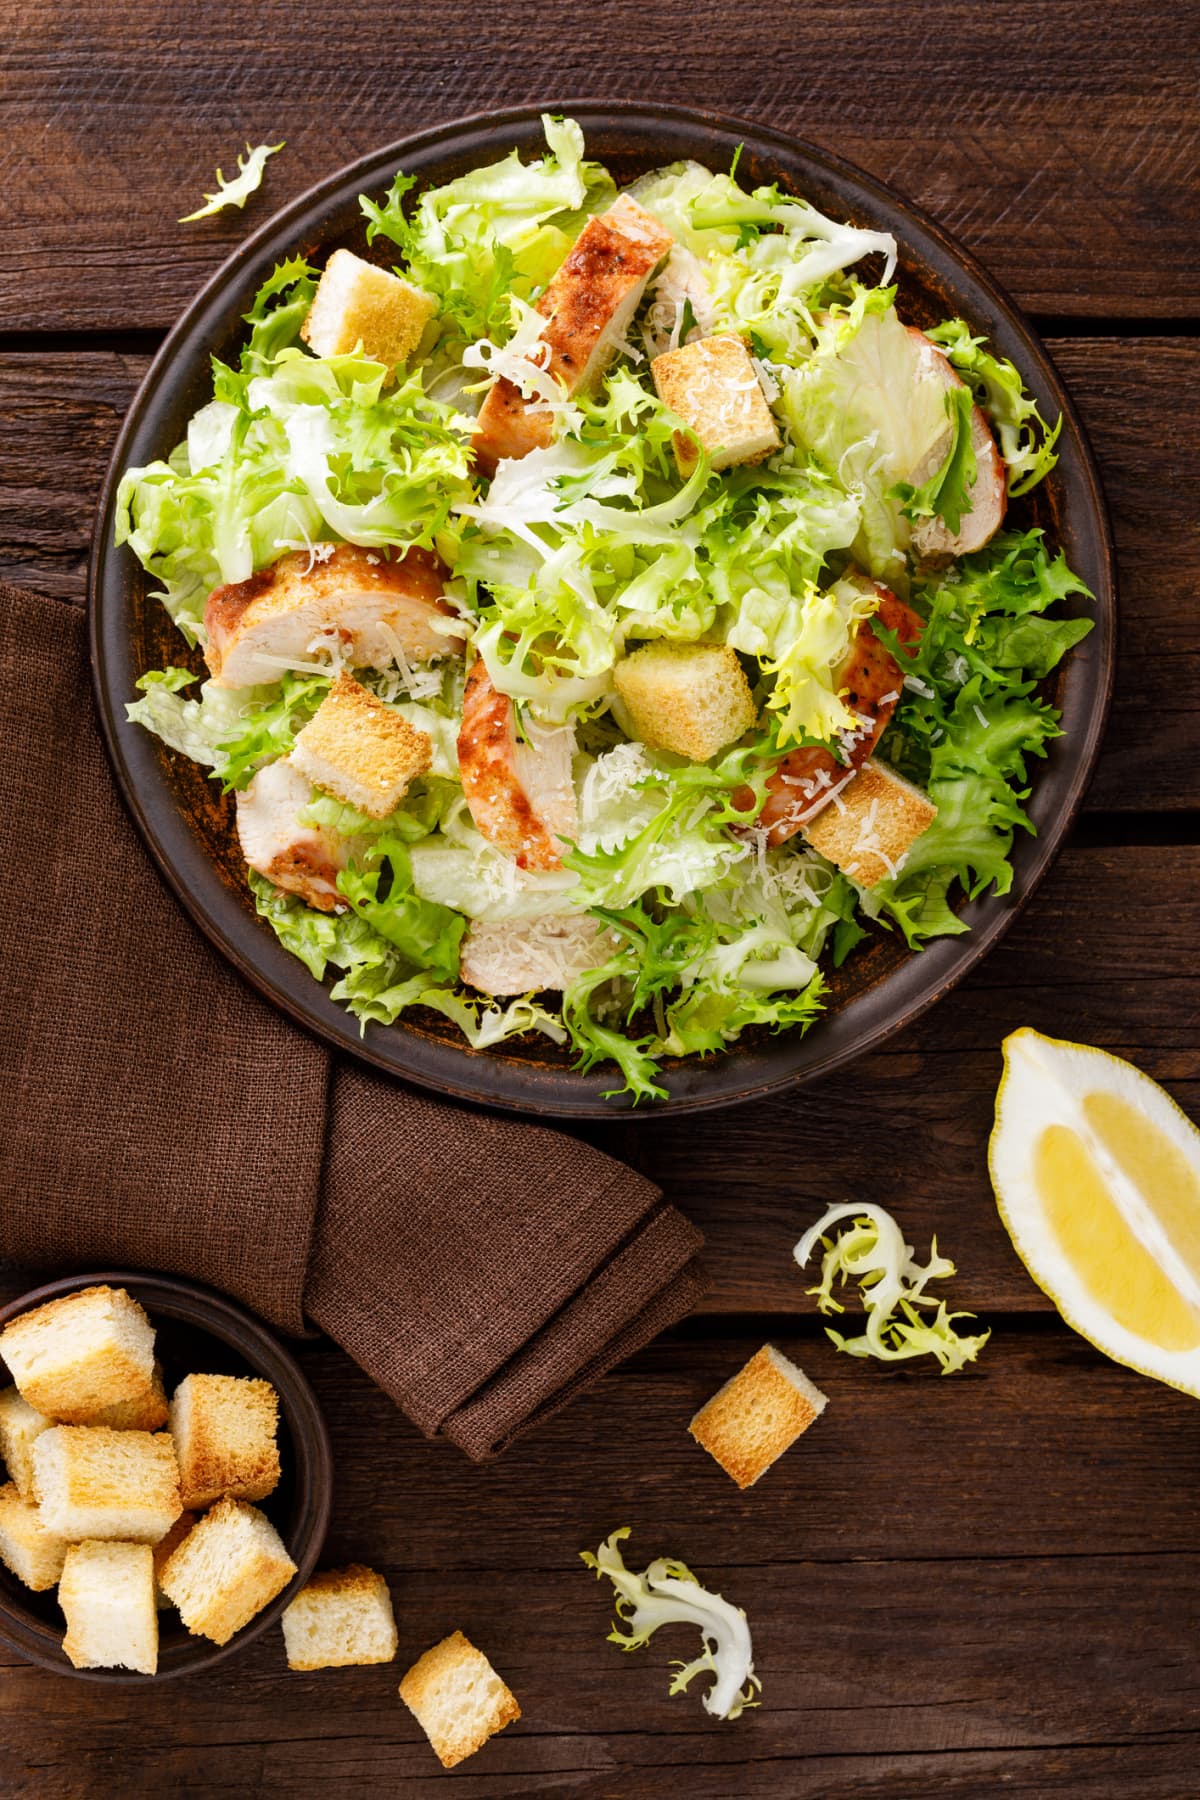 Caesar salad with grilled chicken meat, fresh lettuce, parmesan cheese, and fried croutons